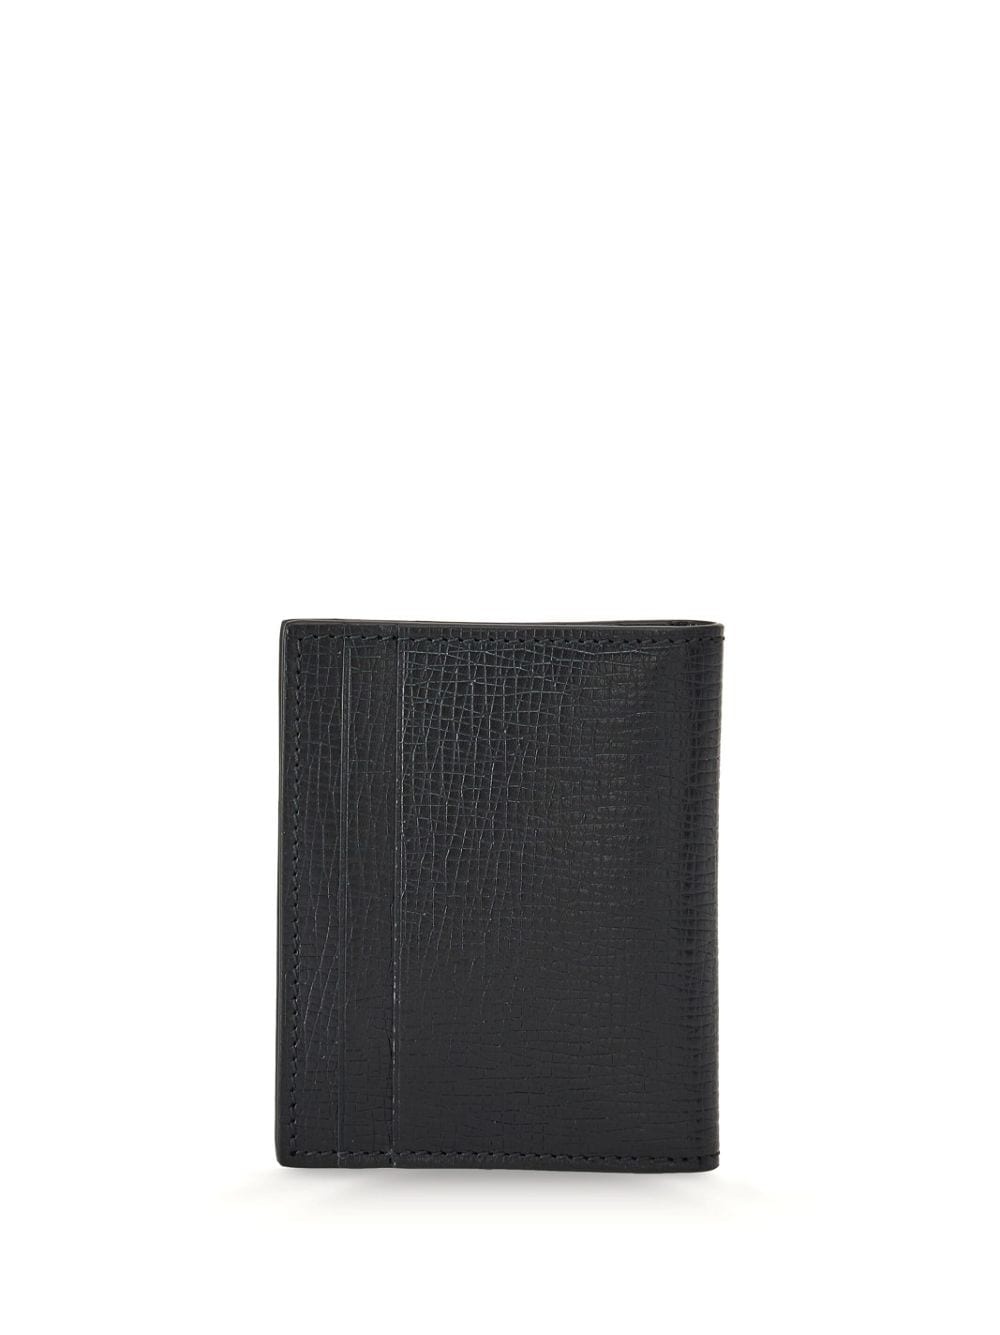 logo-plaque textured leather wallet - 2